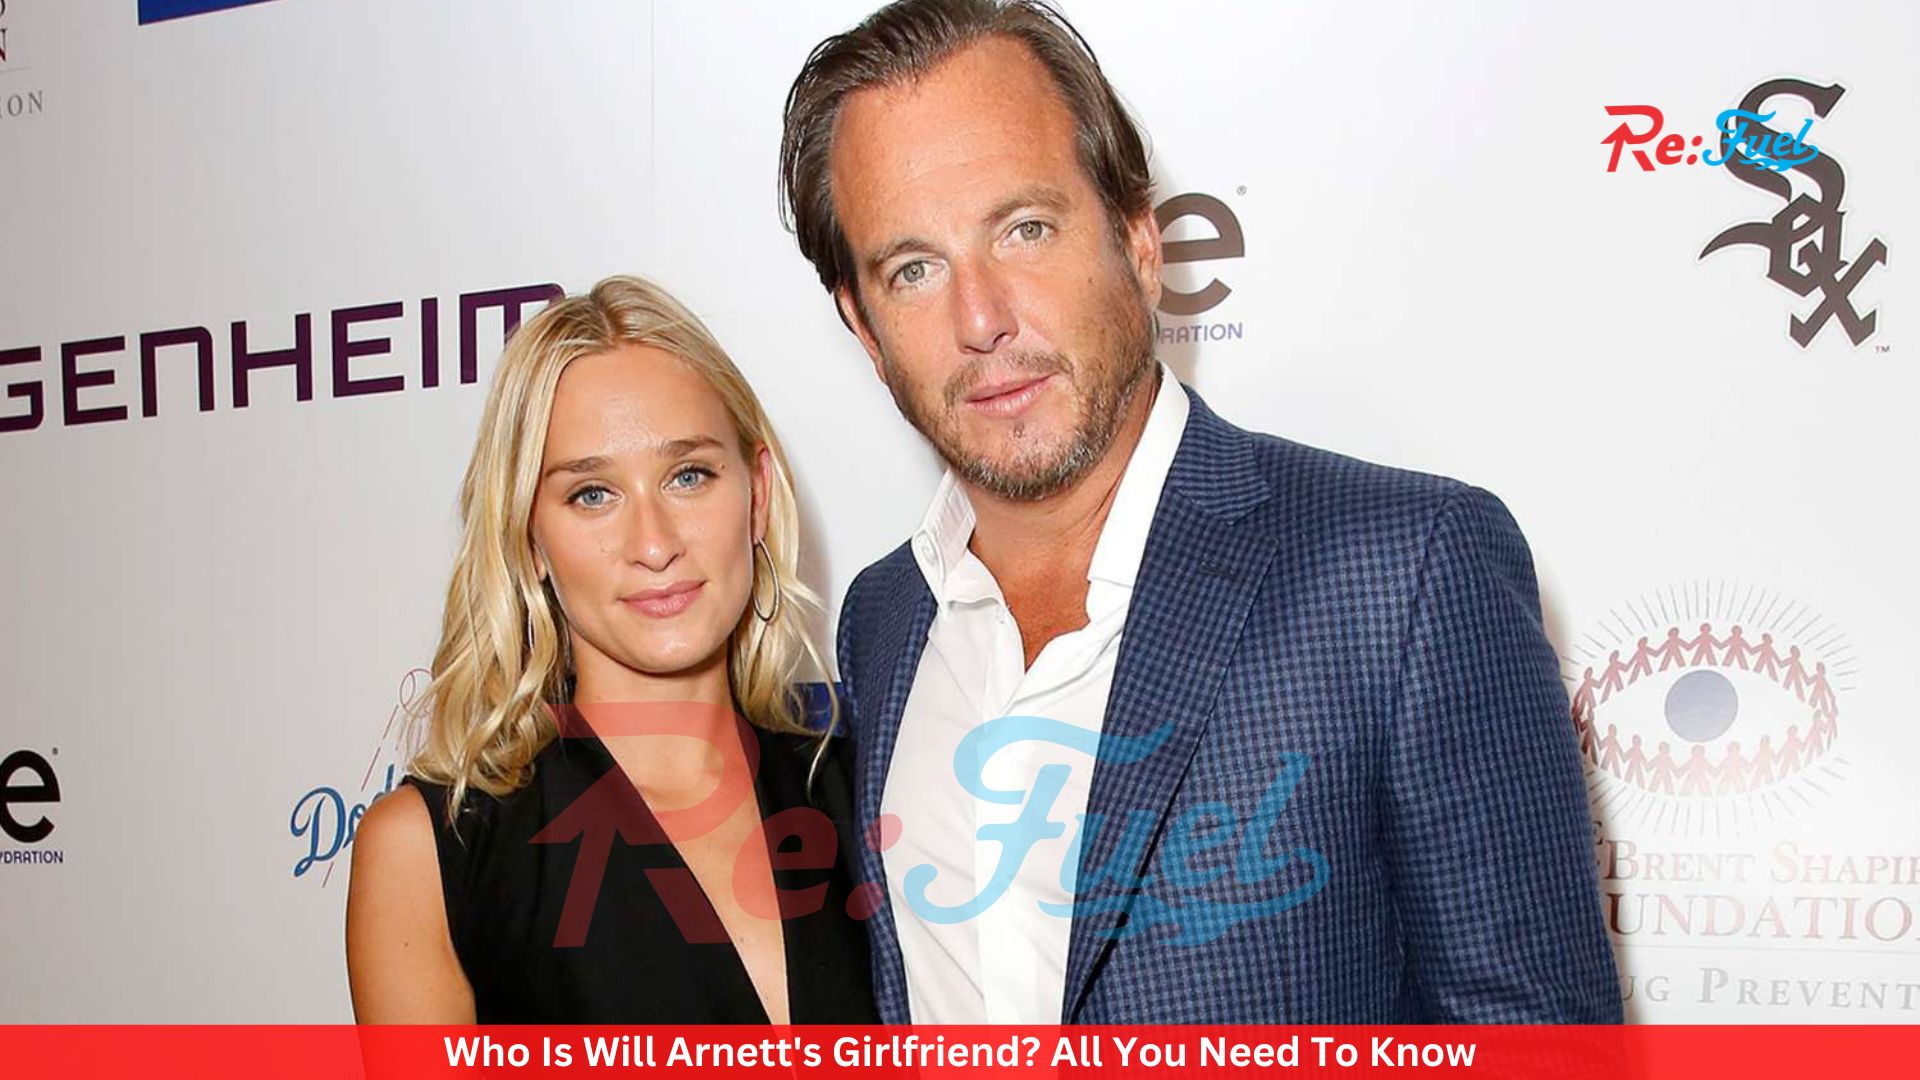 Who Is Will Arnett's Girlfriend? All You Need To Know